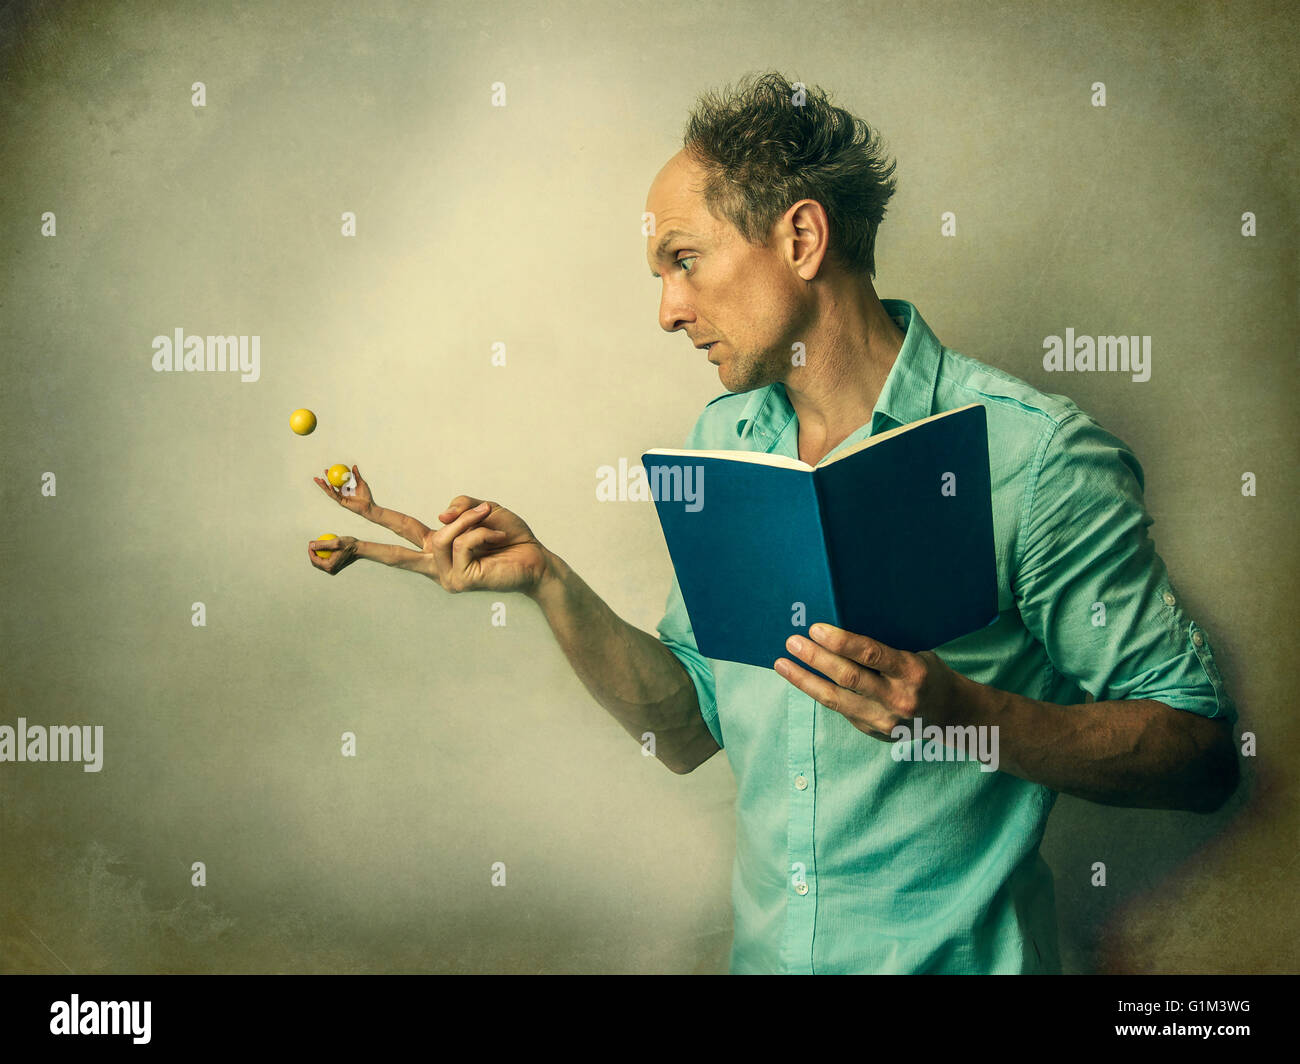 Caucasian man juggling fruit with finger hands Stock Photo